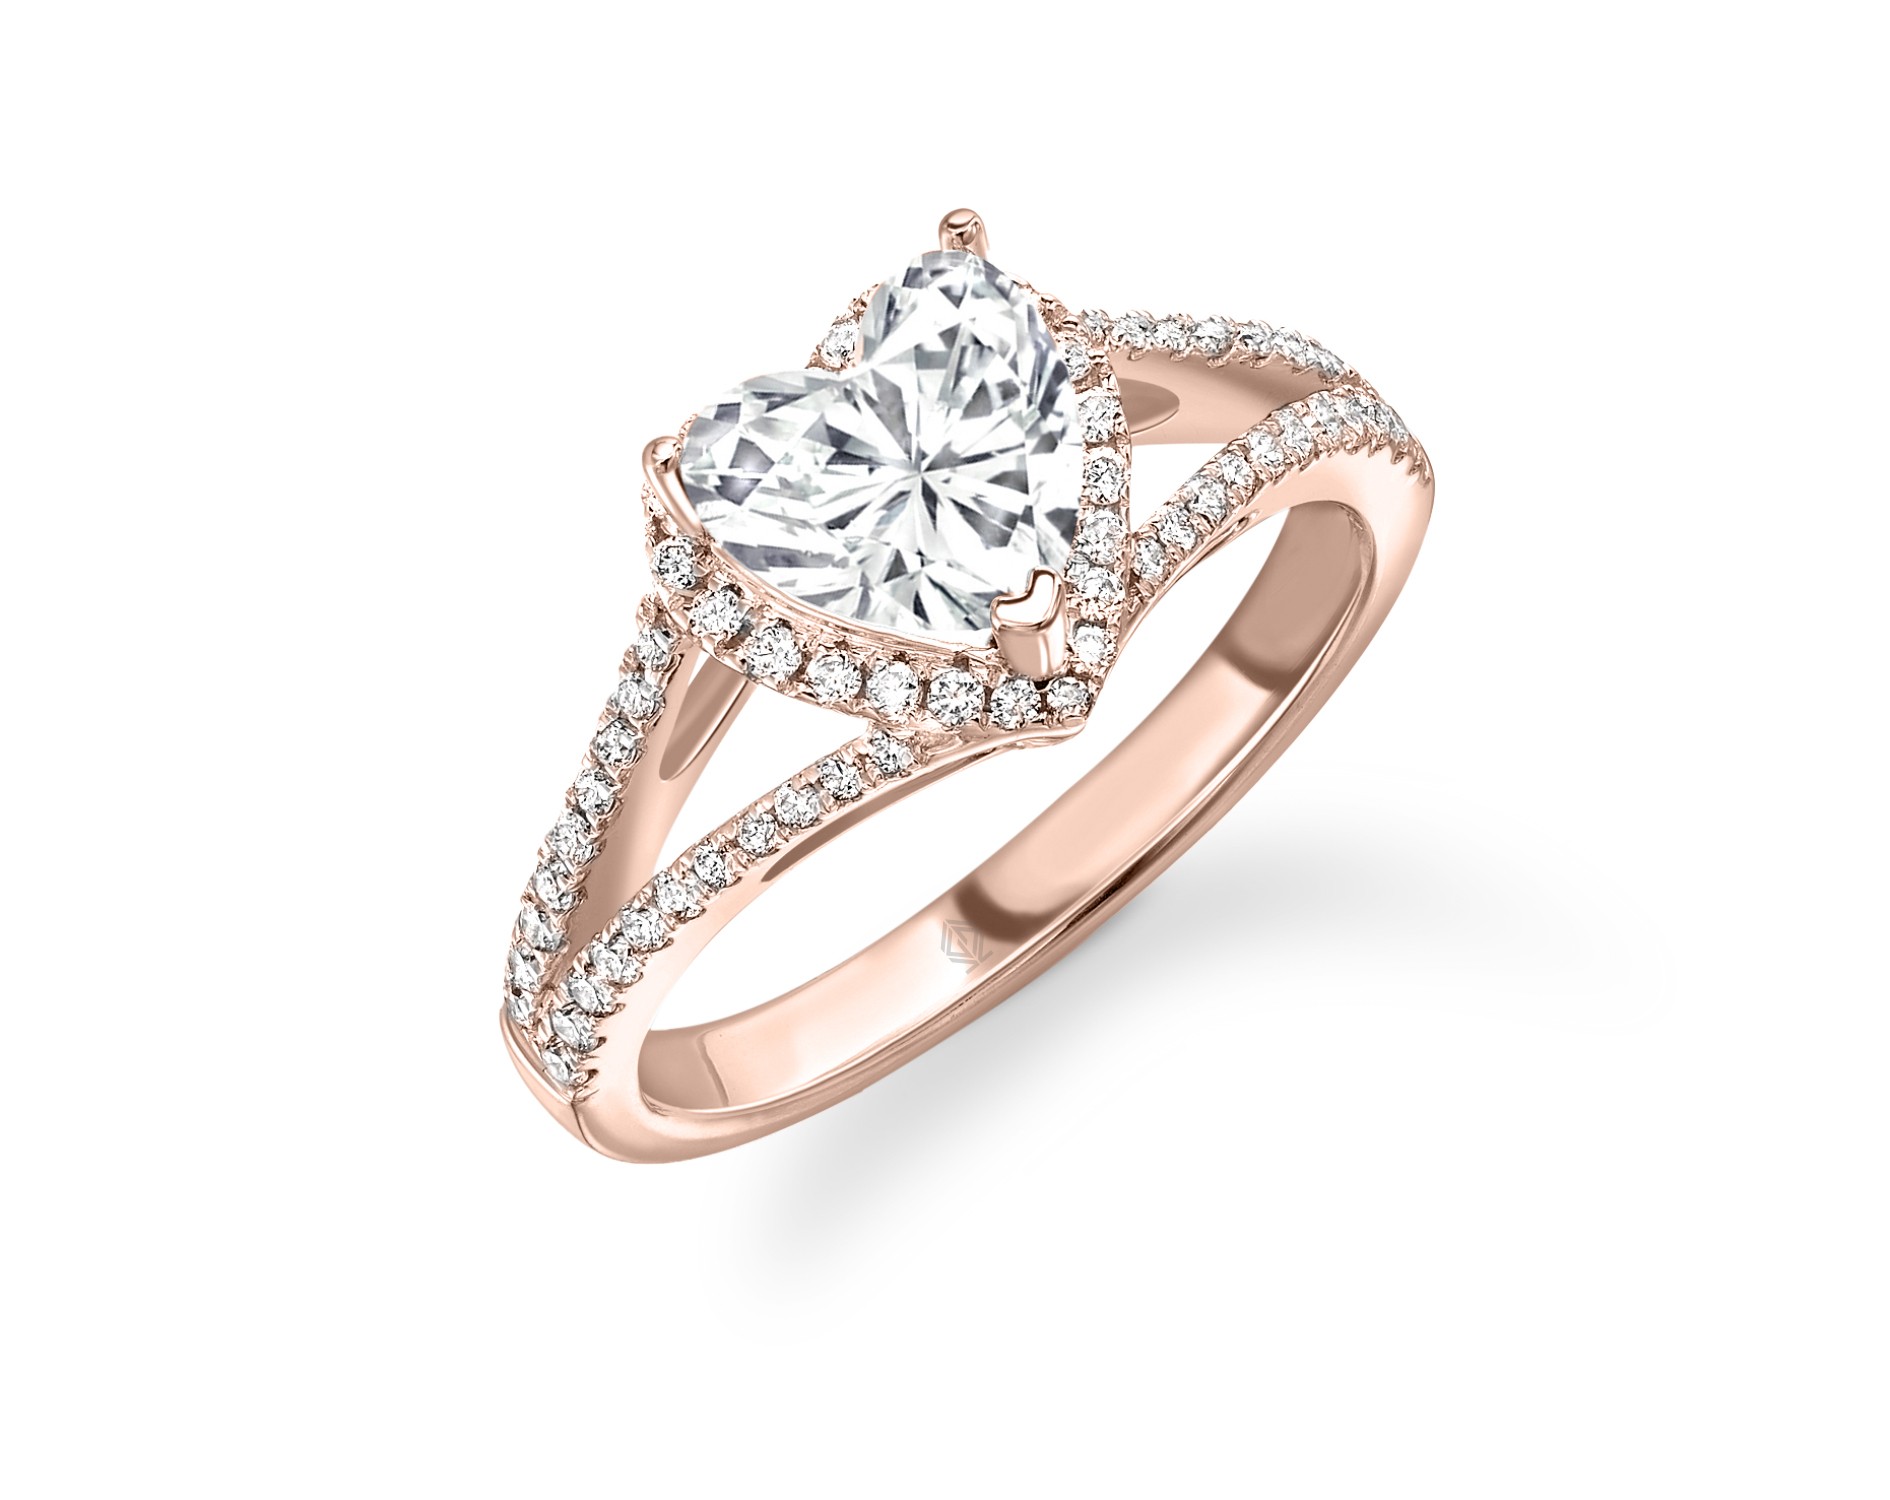 18K ROSE GOLD HEART CUT HALO DIAMOND ENGAGEMENT RING WITH SIDE STONES IN SPLIT SHANK PAVE SET